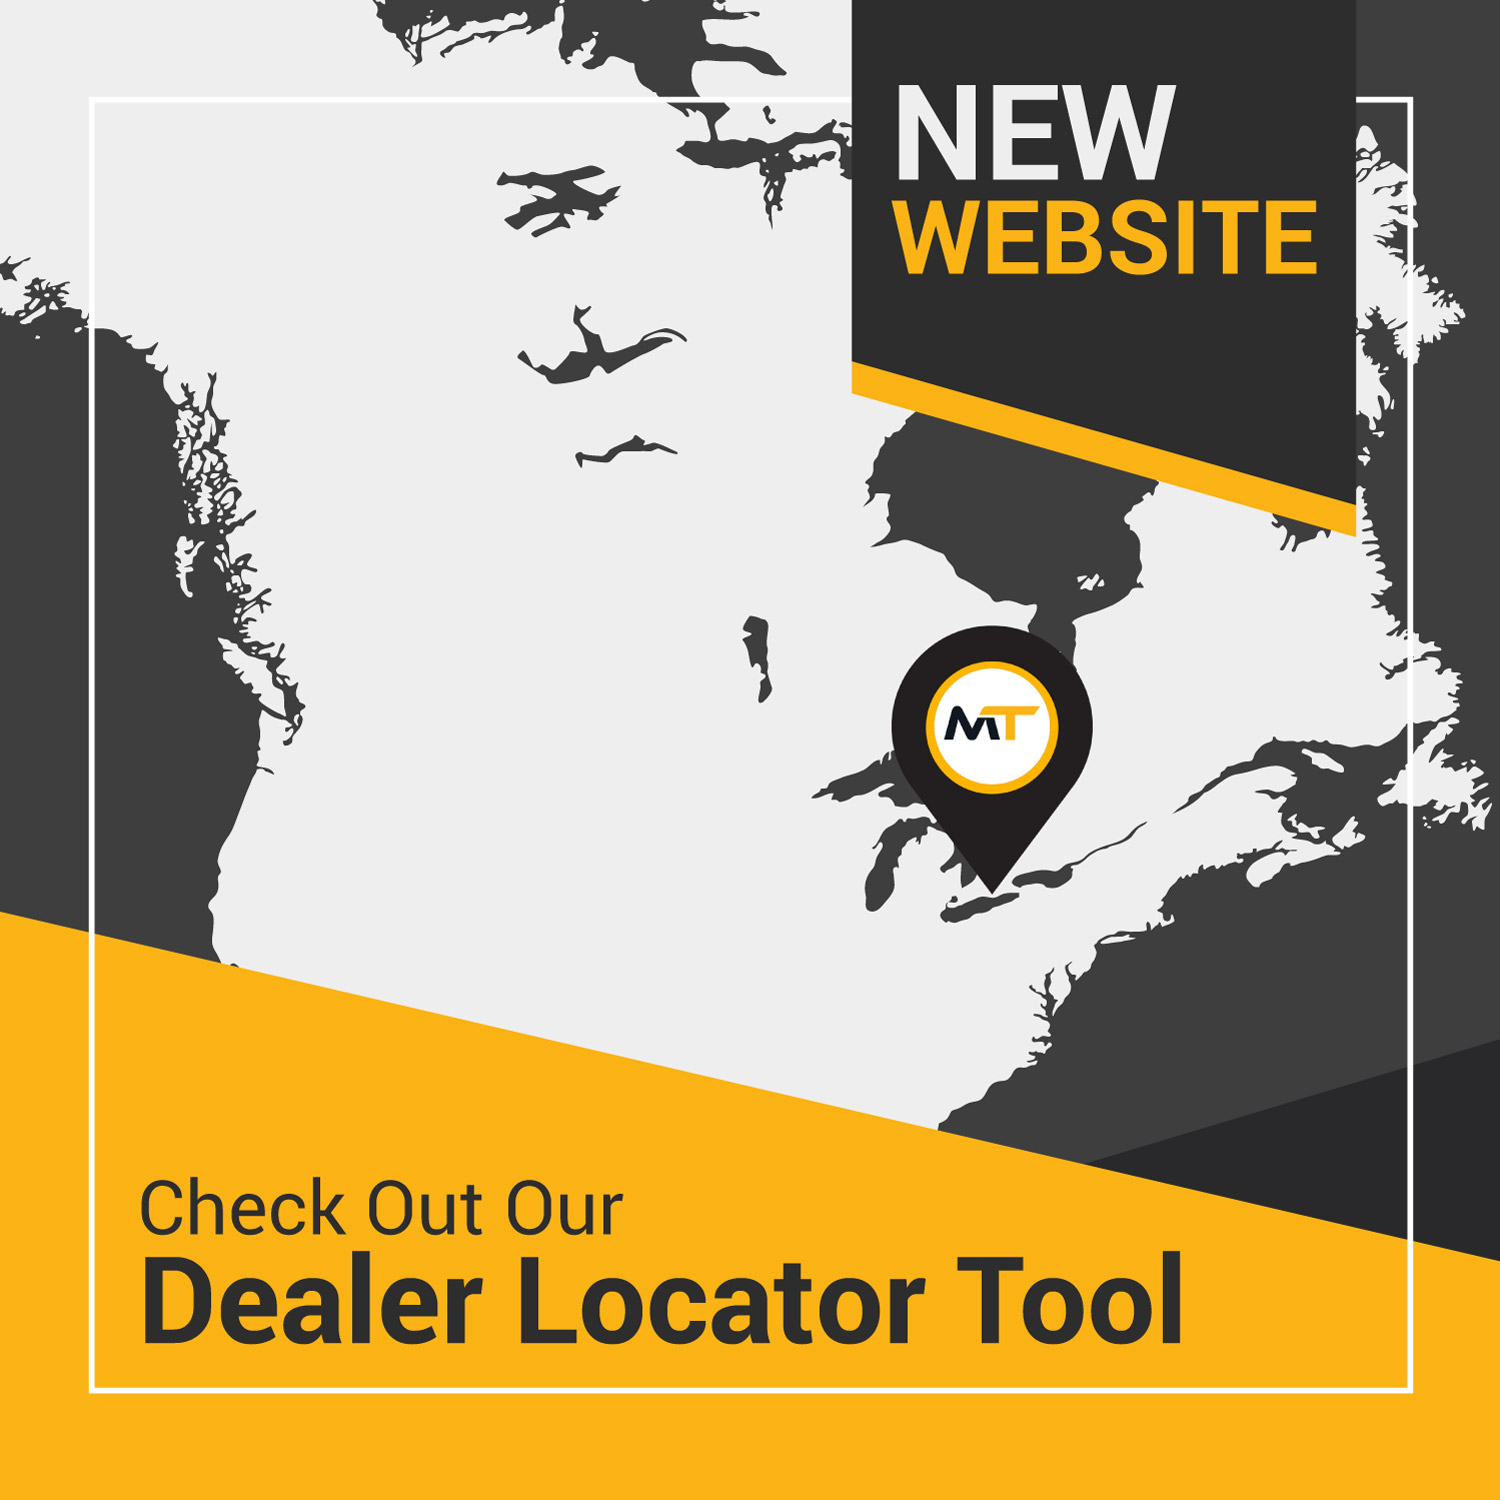 trackless vehicles dealer locator tool image map north america